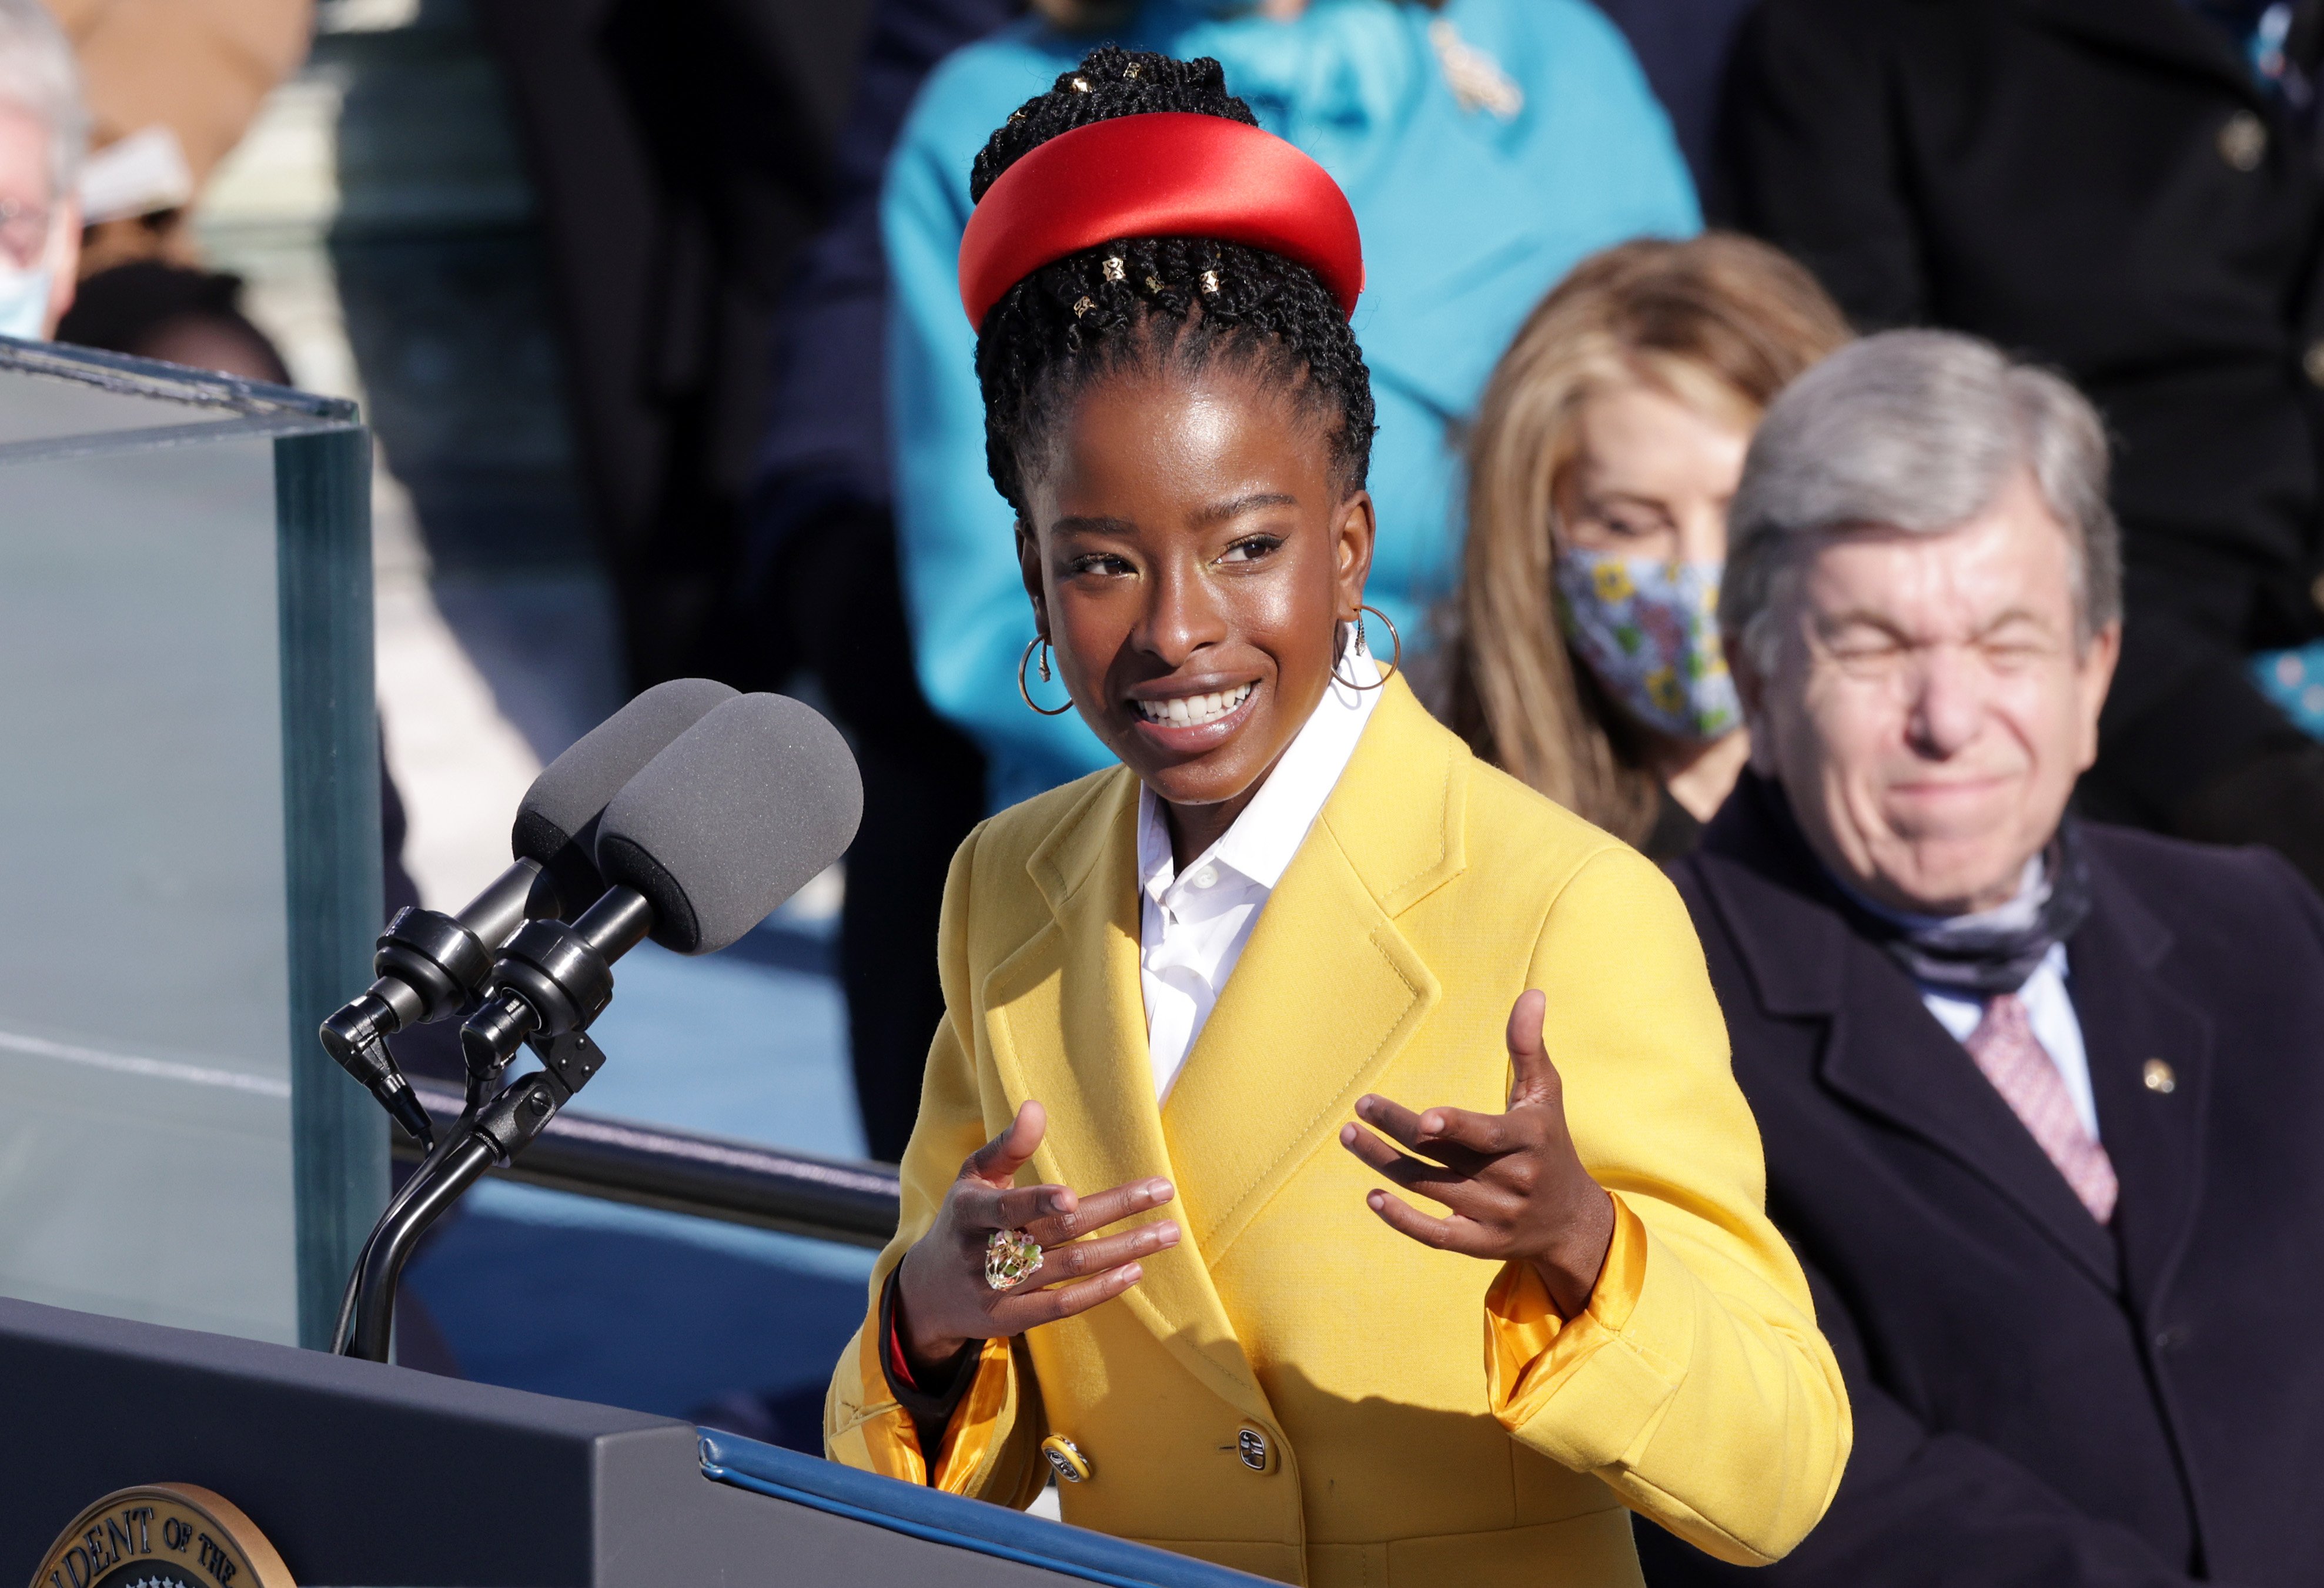 Amanda Gorman pictured at Inauguration Day reciting her poem. 2021, Washington. | Photo: Getty Images